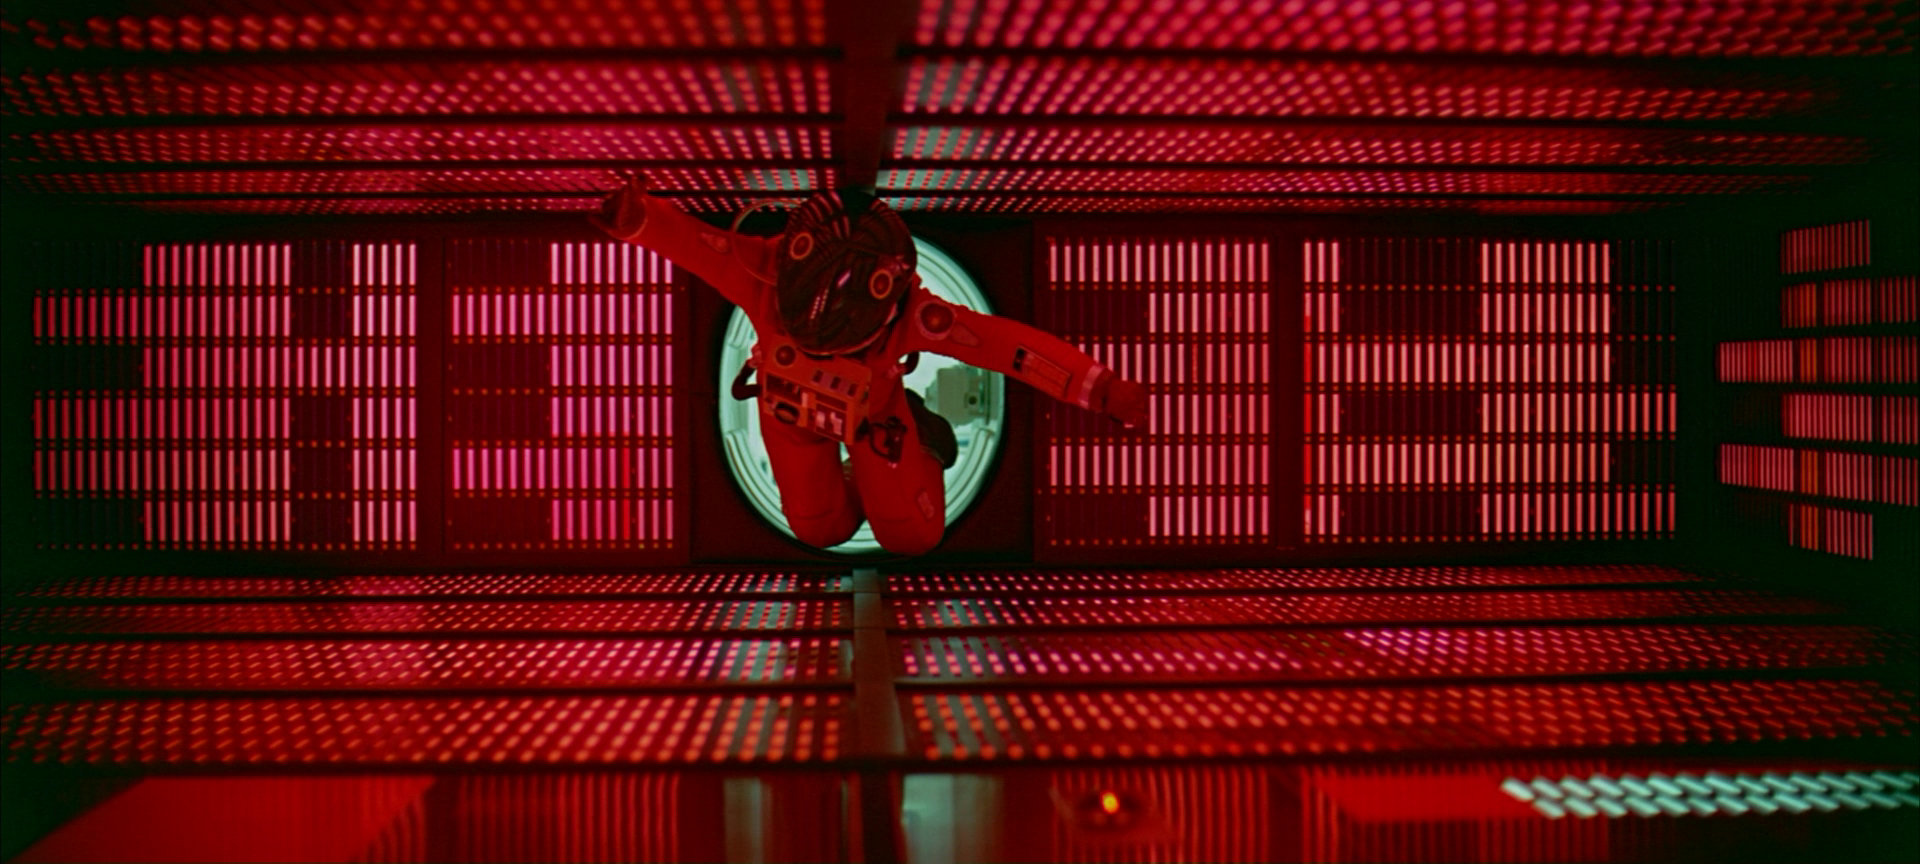 Pic: In the original 2001, Bowman enters HAL 9000's holographic memory banks.